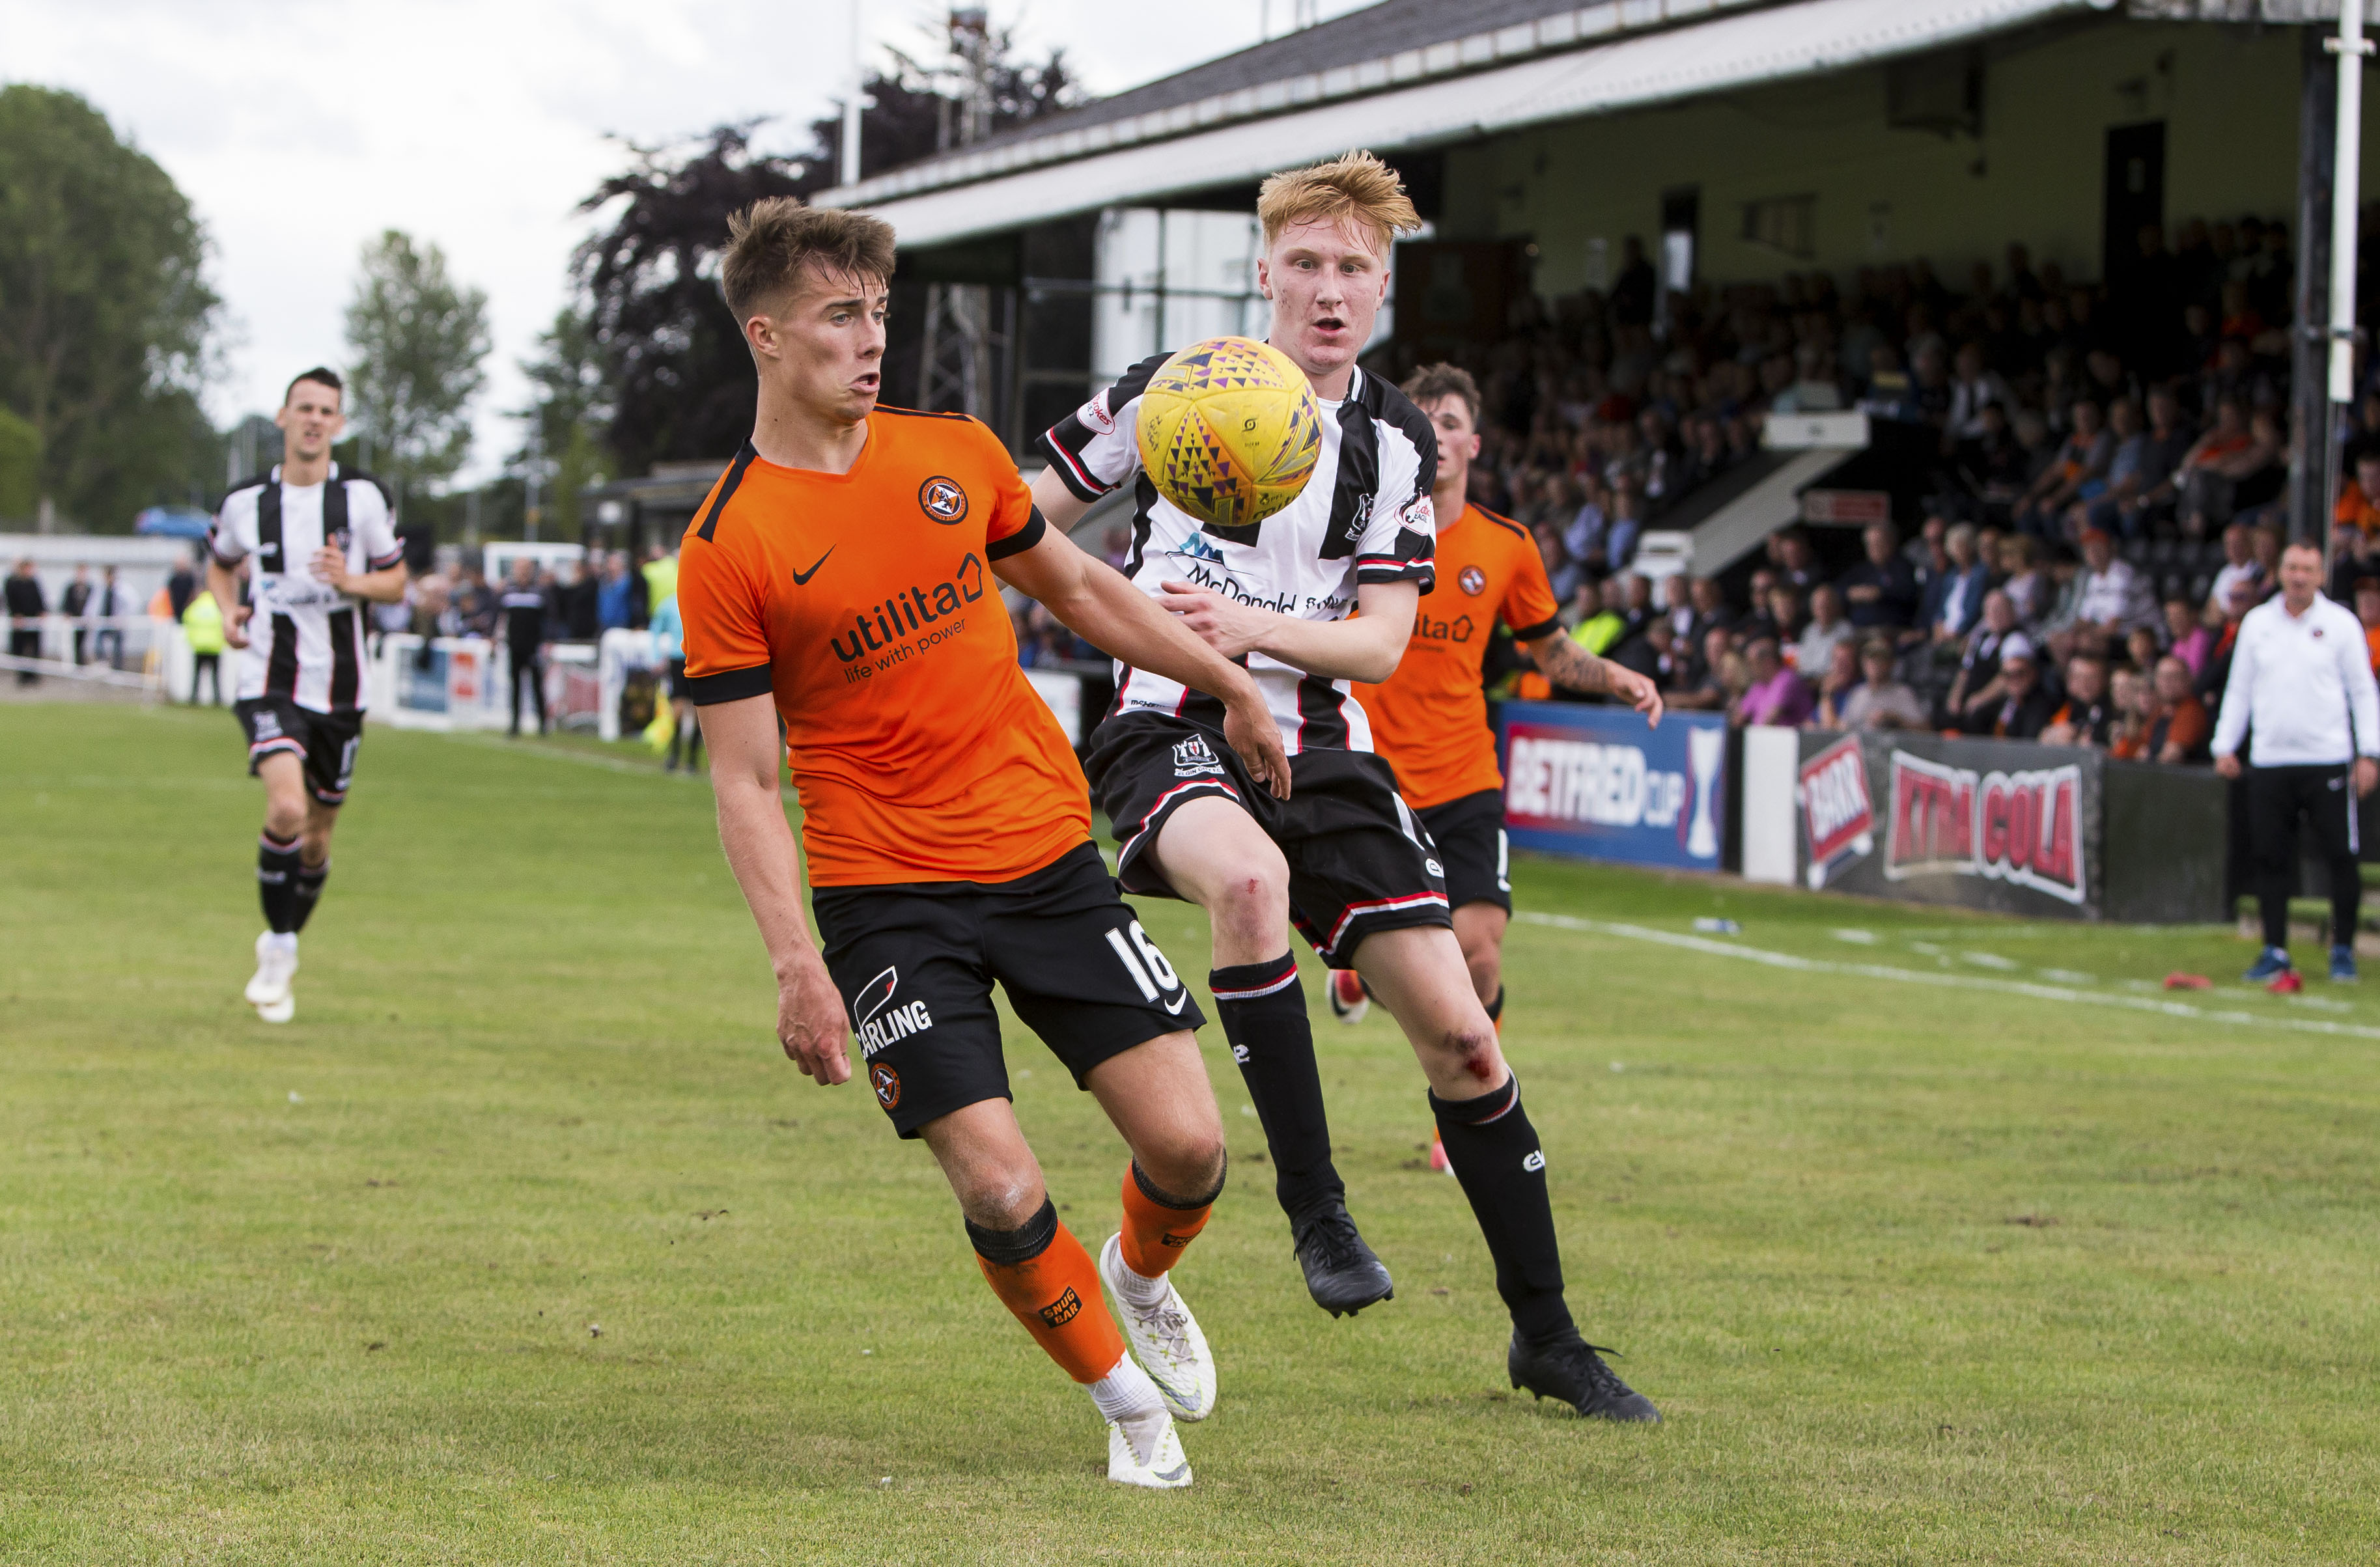 28/07/18 BETFRED CUP GROUP A
 ELGIN CITY v DUNDEE UNITED (0-4) 
 BOROUGH BRIGGS - ELGIN
 Dundee United's Matthew Smith (left) holds off Elgin's David Wilson